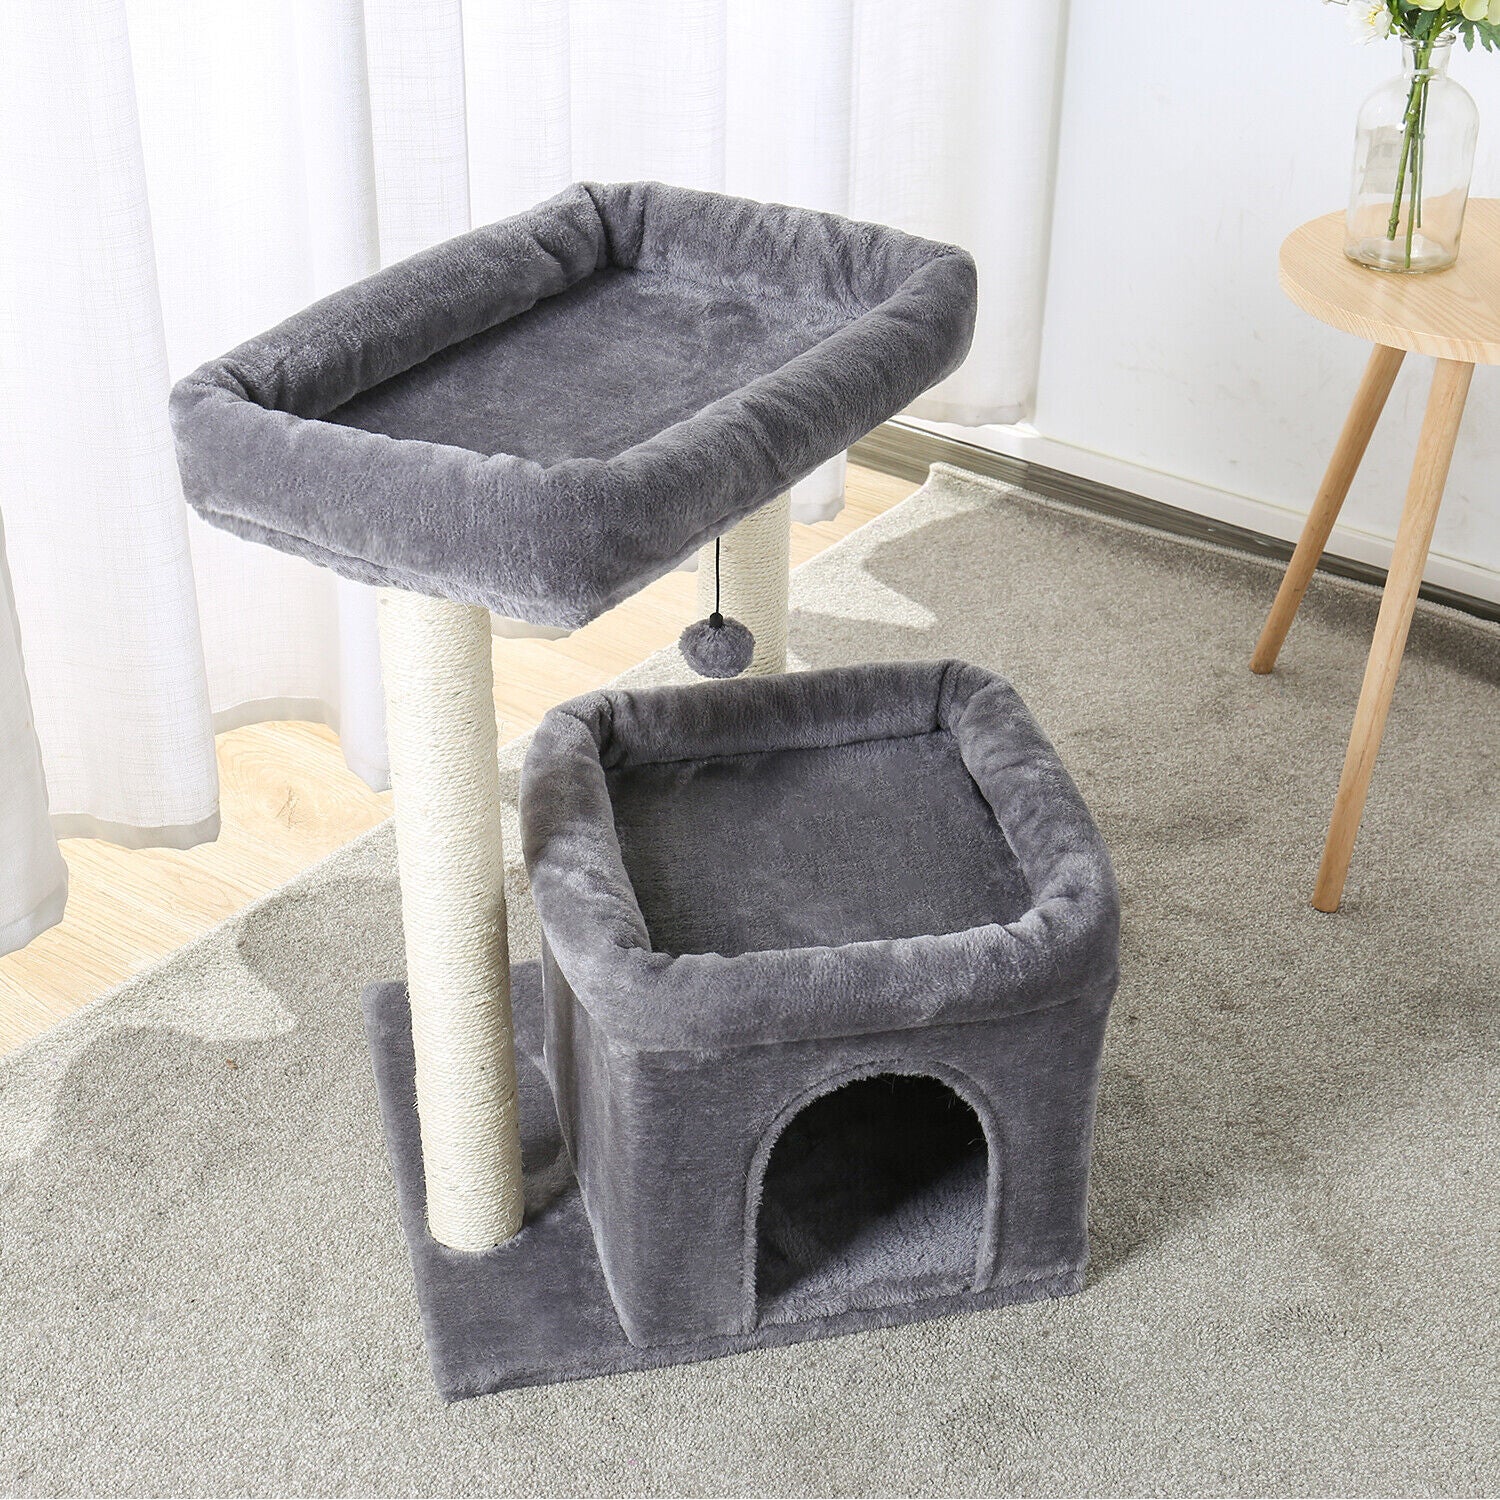 NEW Cat Tree Scratching Post Cats Tower House Scratcher Bed Kitten Toys AU